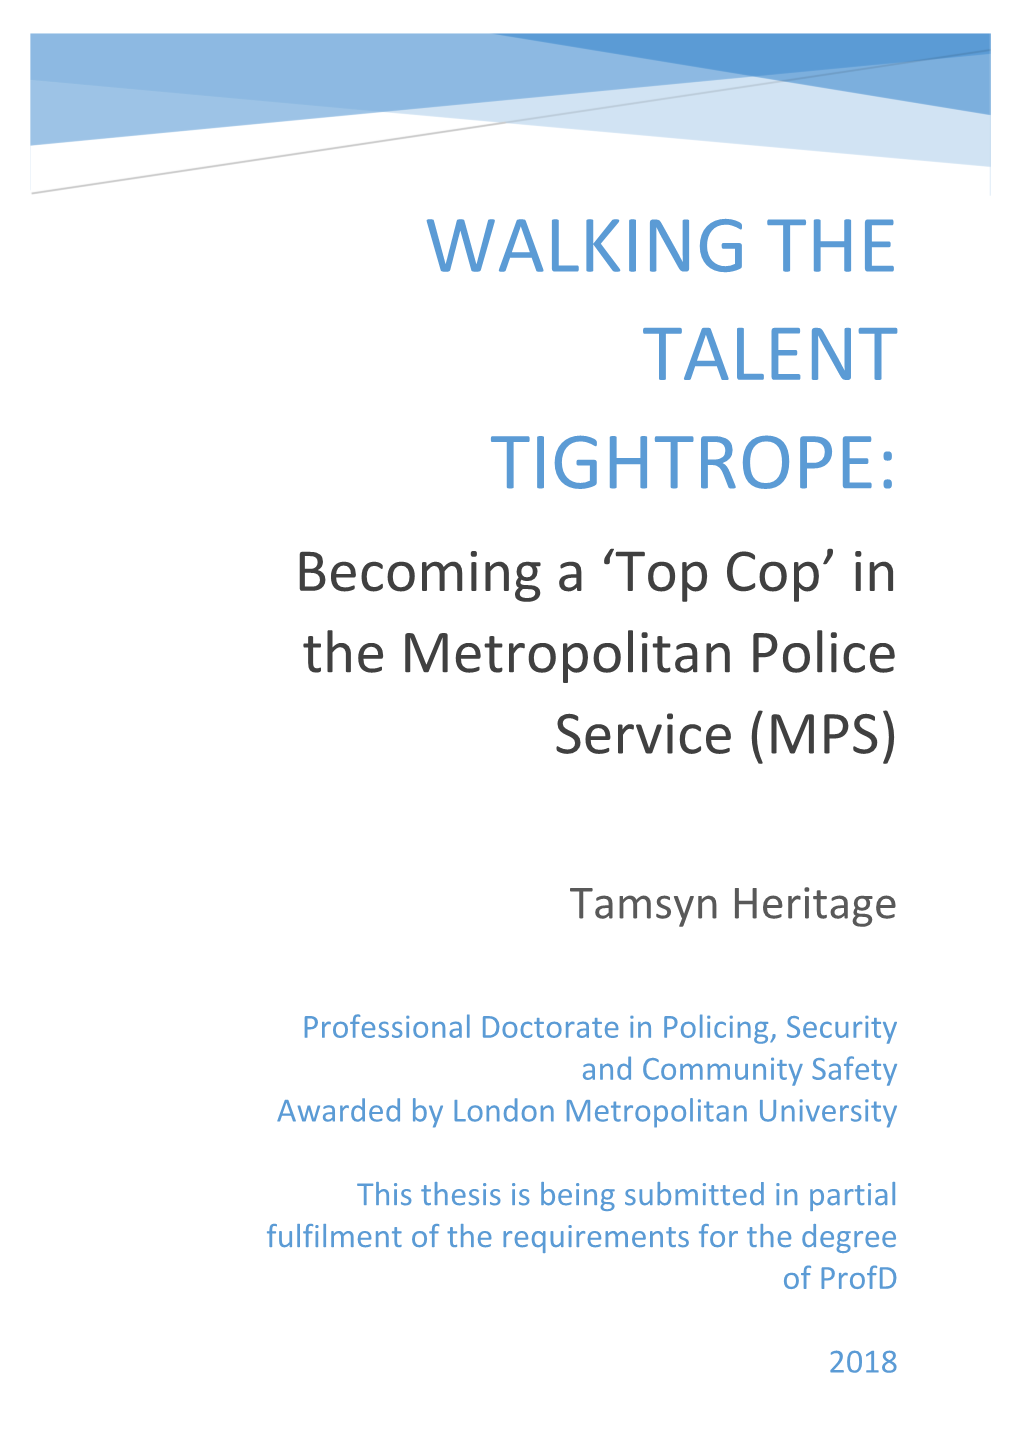 WALKING the TALENT TIGHTROPE: Becoming a ‘Top Cop’ in the Metropolitan Police Service (MPS)